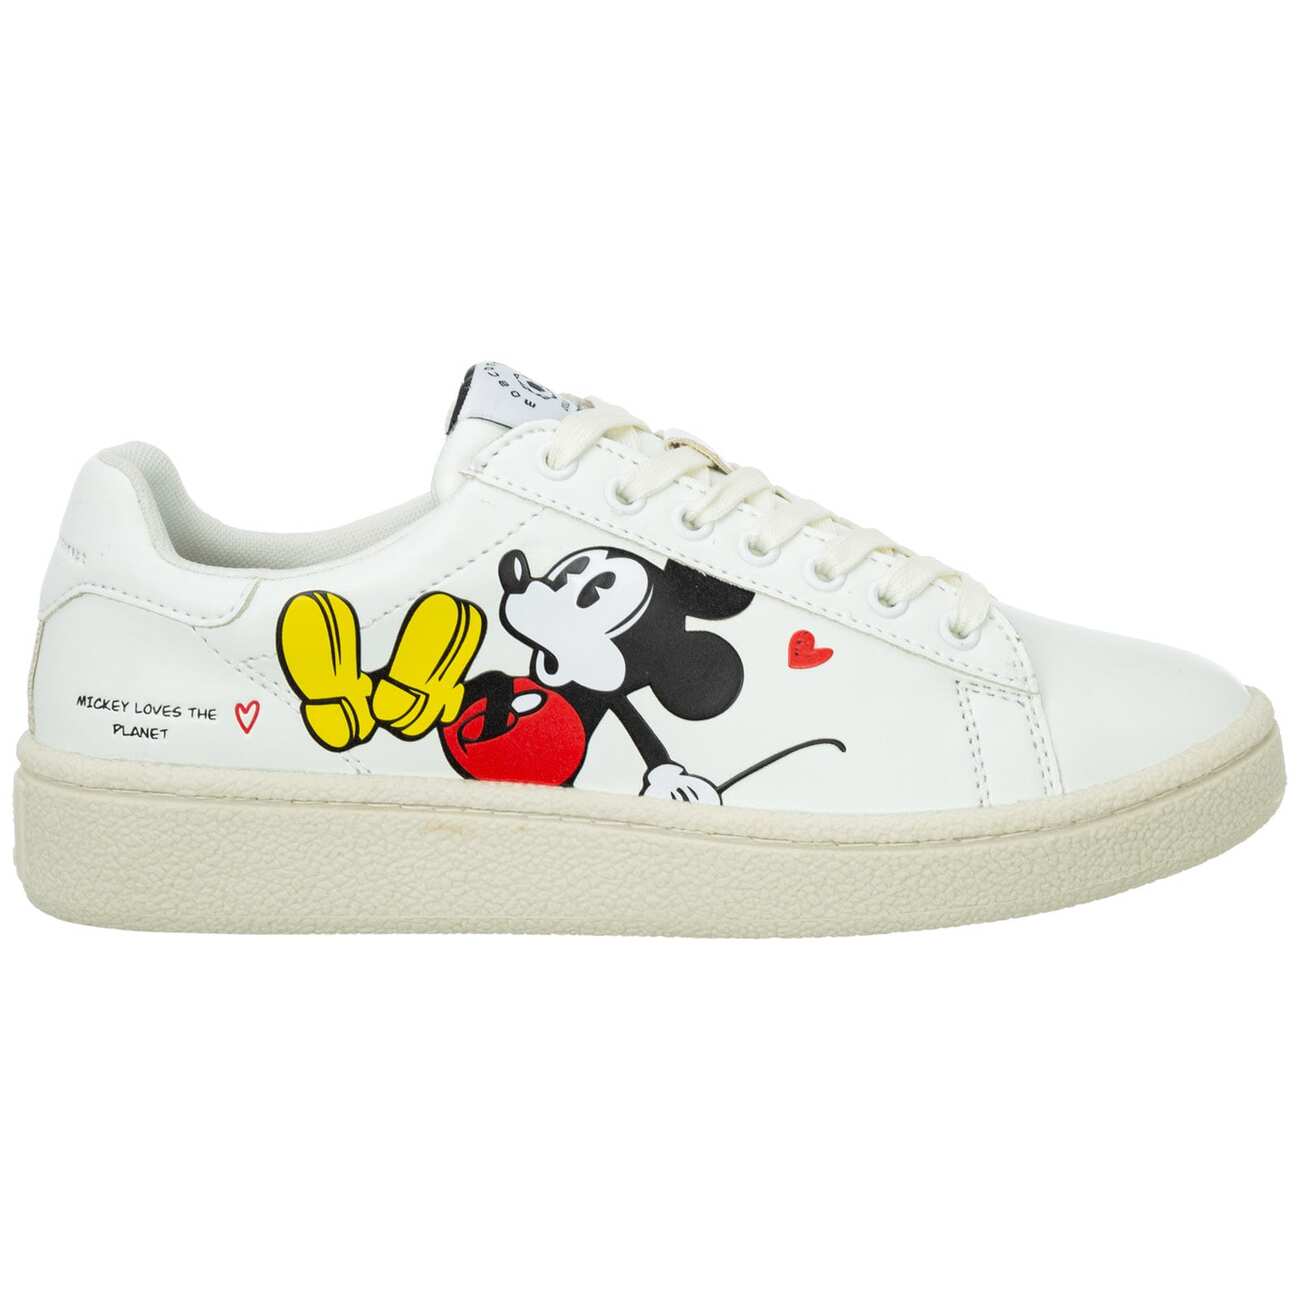 M.O.A. master of arts Moa Master Of Arts Disney Sneakers in white